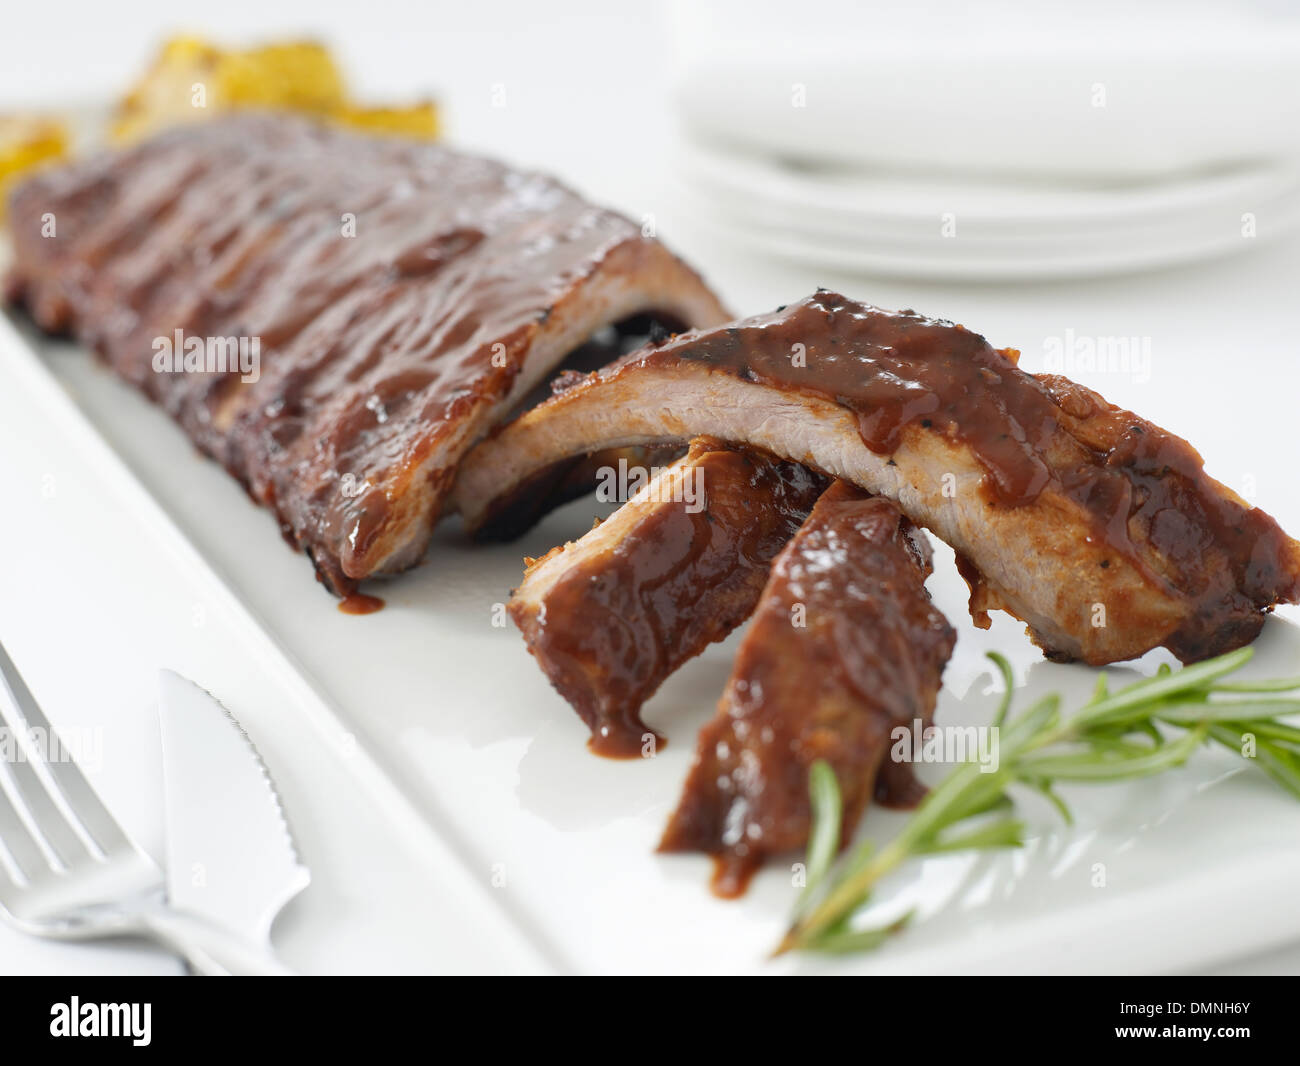 Barbecued pork spare ribs meal food dinner Stock Photo